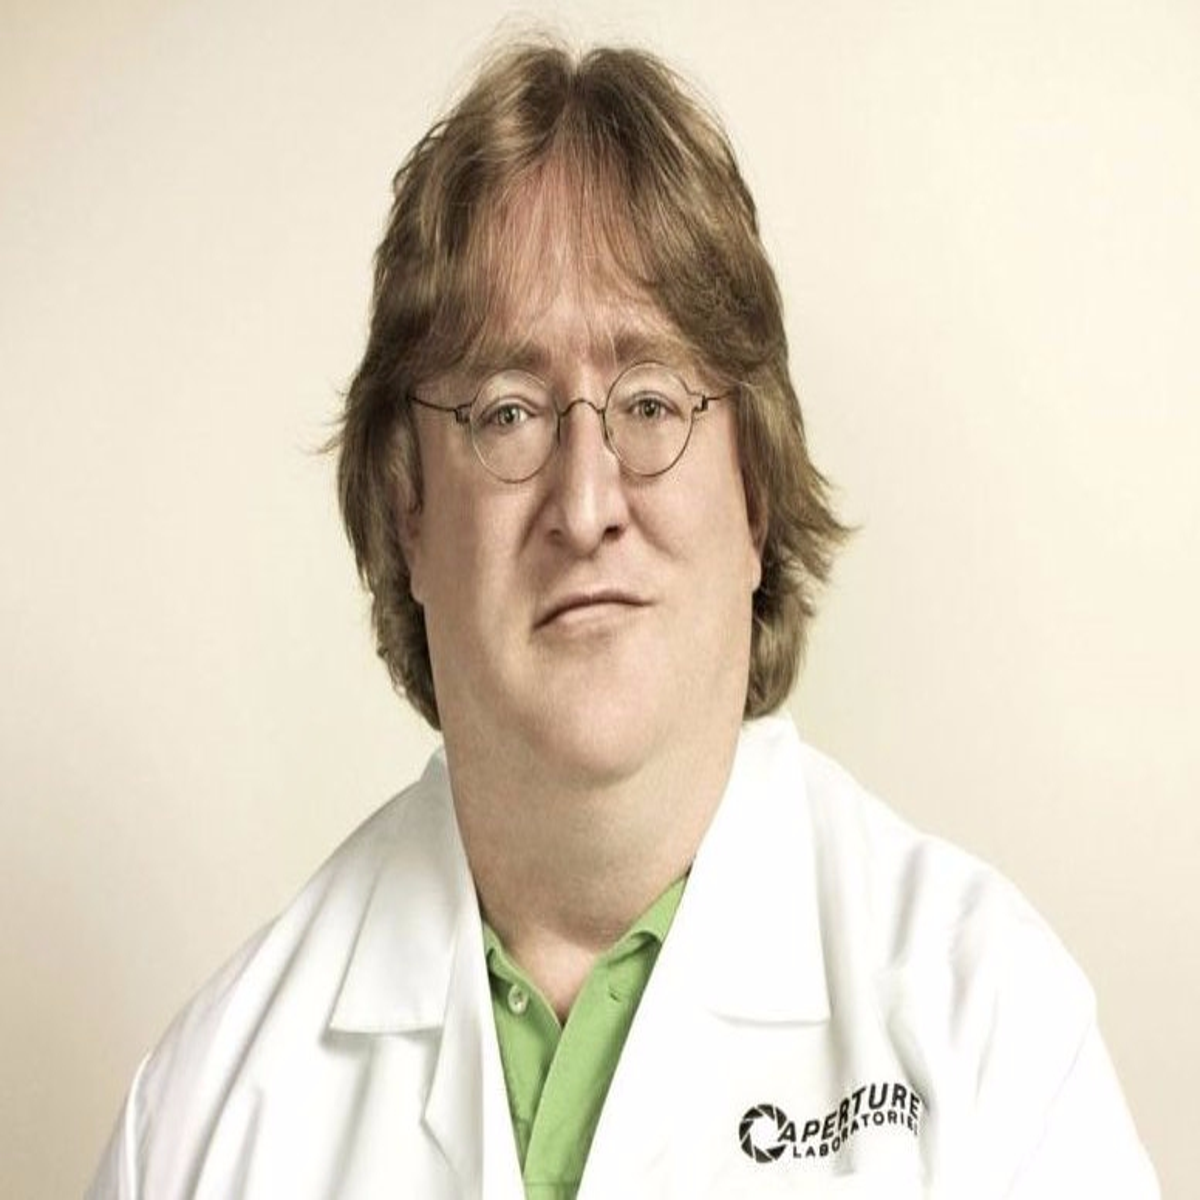 Gabe Newell Ordered to Appear In Person for Valve Lawsuit - Try Hard Guides